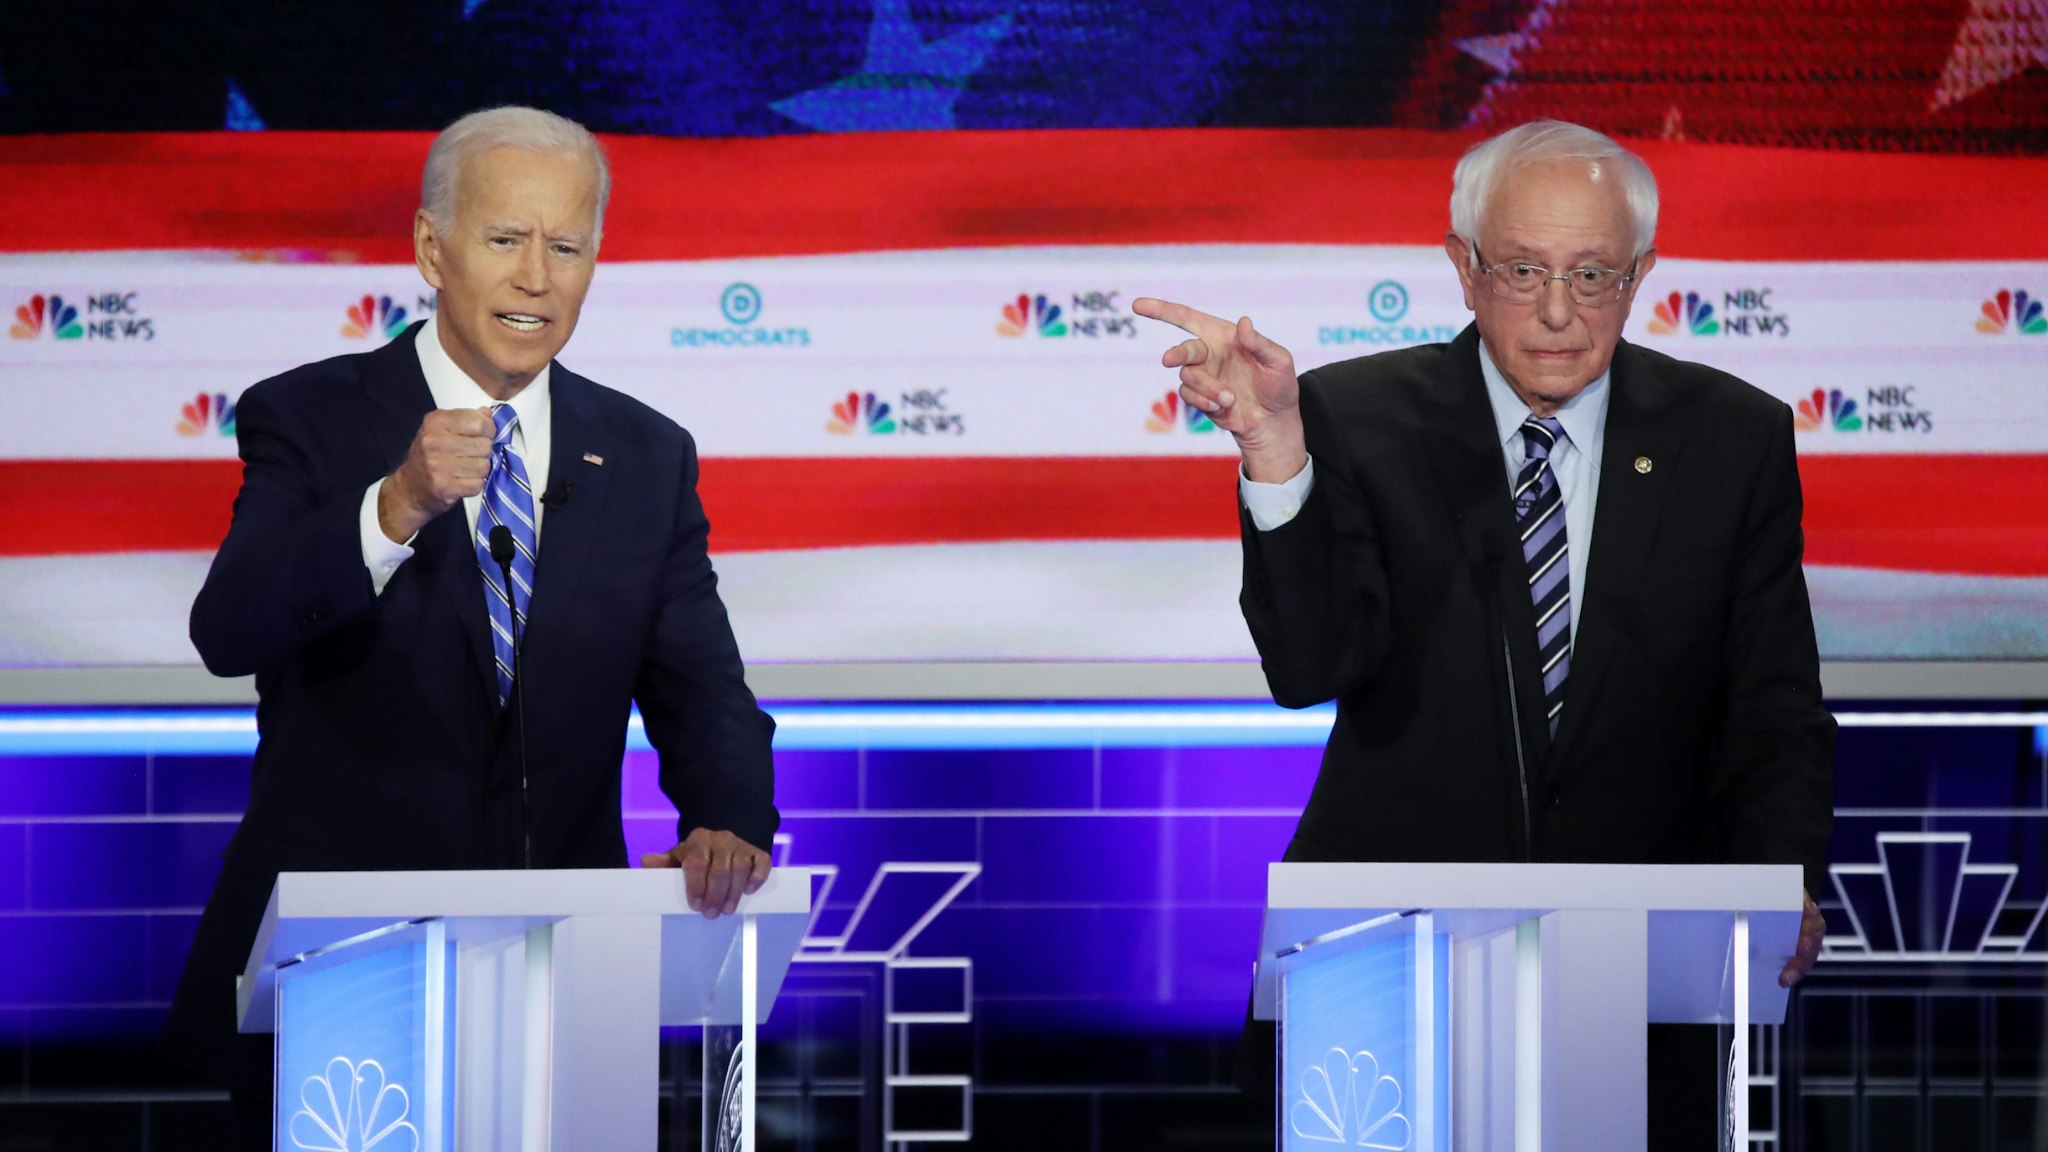 Democratic presidential candidates former Vice President Joe Biden and Sen. Bernie Sanders (I-VT) speak during the second night of the first Democratic presidential debate on June 27, 2019 in Miami, Florida.